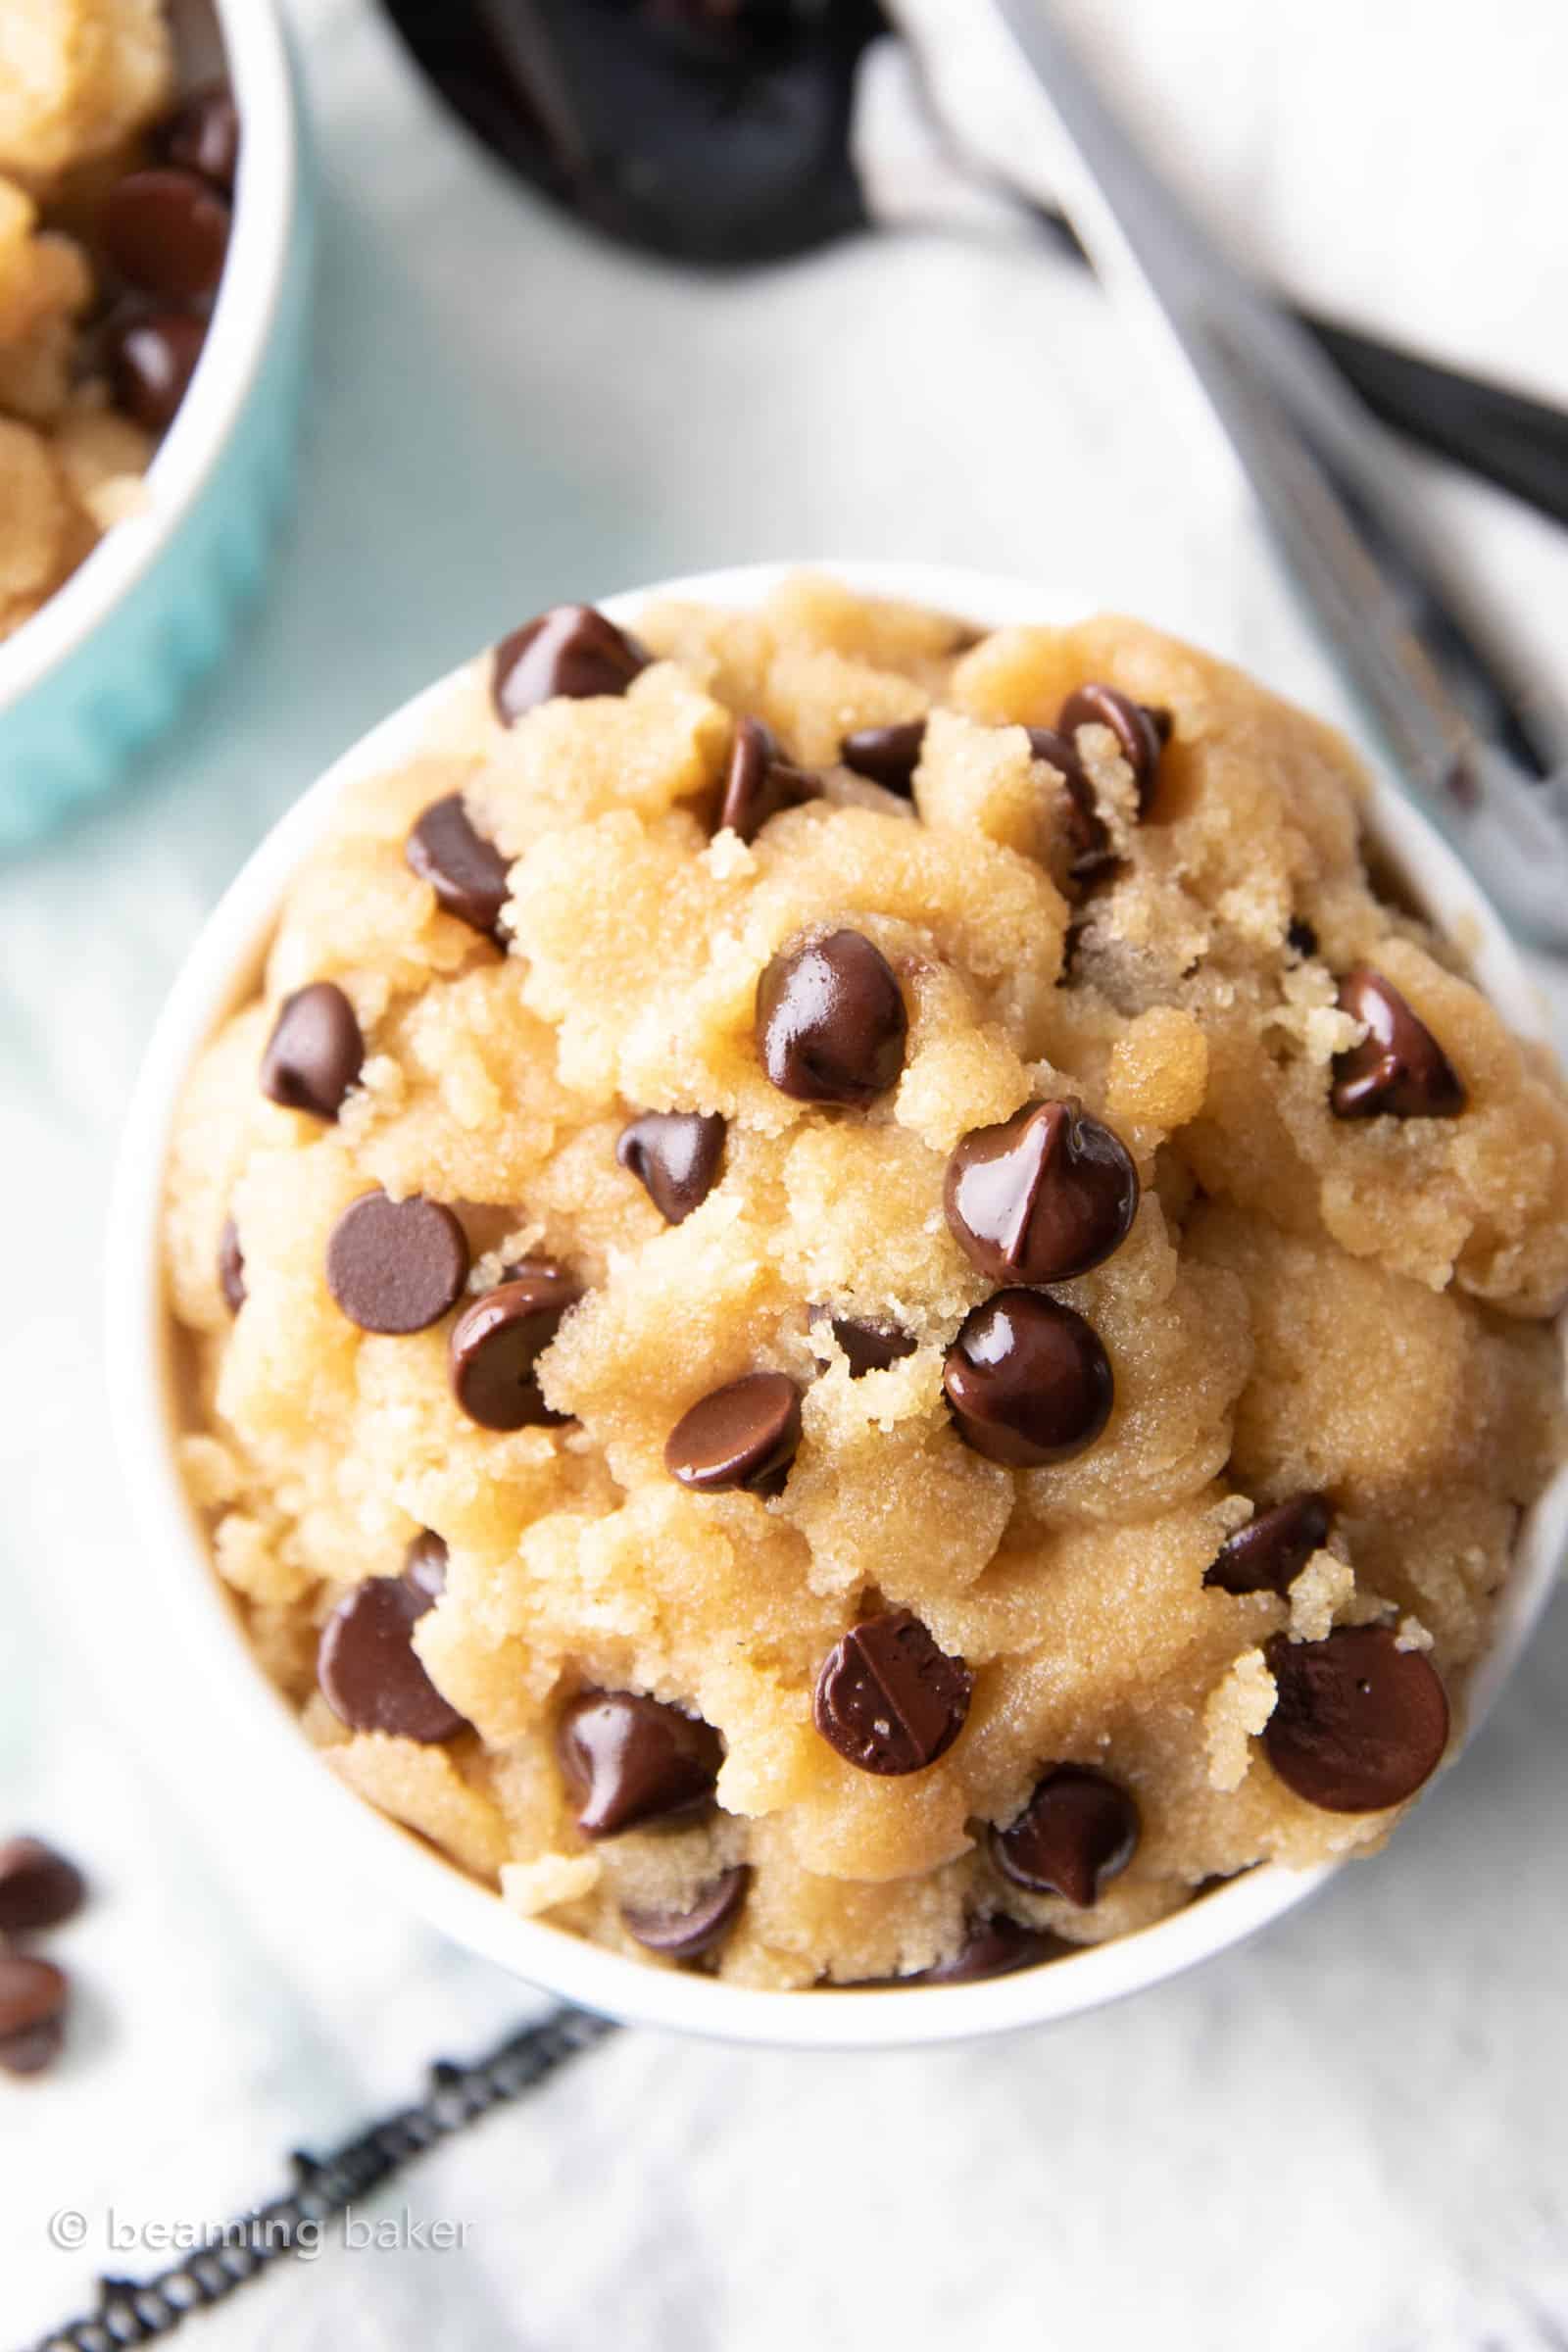 Keto Cookie Dough Recipe: indulgently sweet ‘n satisfying keto cookie dough that’s deliciously low carb! Super easy to make & even easier to eat! #Keto #CookieDough #LowCarb | Recipe at BeamingBaker.com